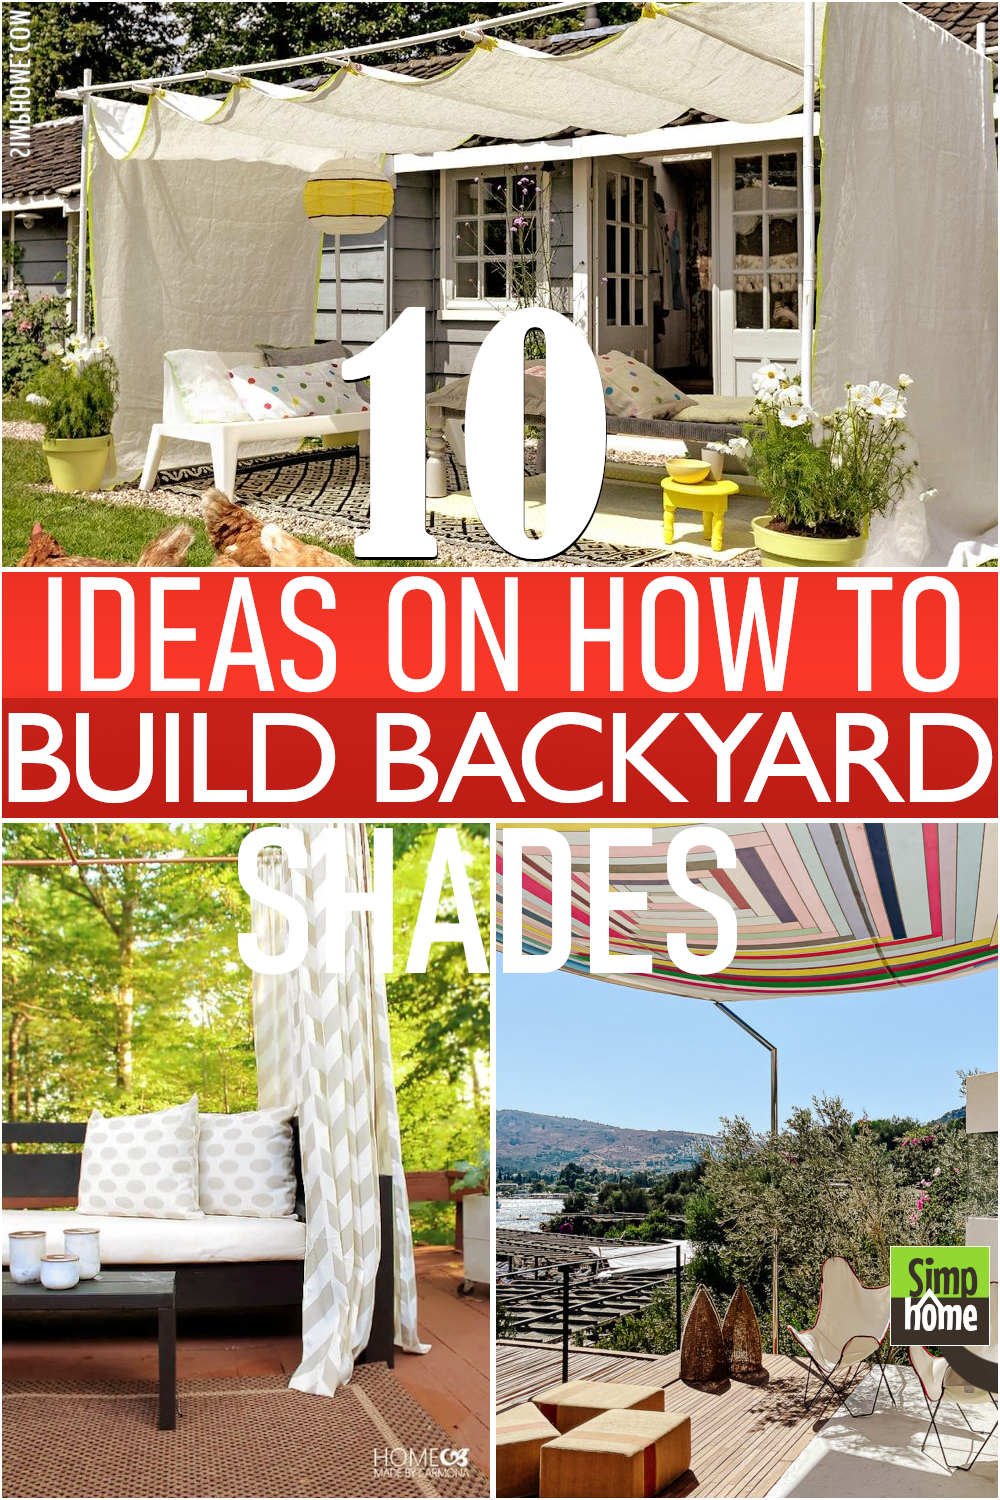 Ideas on How to Build Backyard Shades image